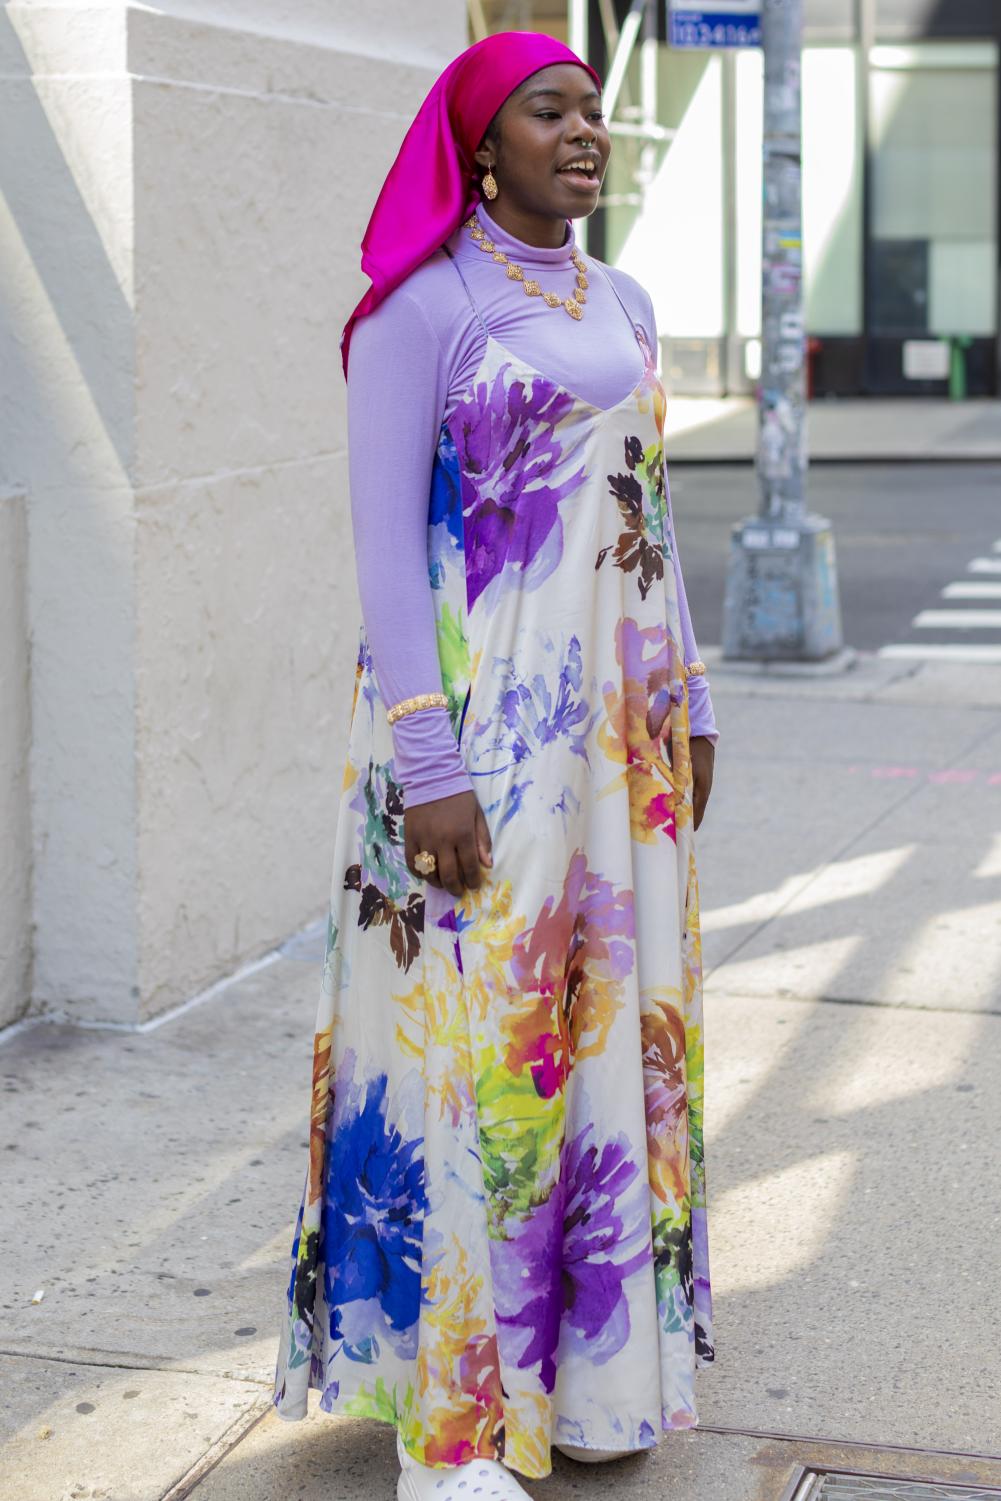 Hairiya Maiyaki is standing outside the College of Arts and Science wearing a floral maxi dress over a lilac long-sleeve shirt. Maiyaki wears a bright pink satin head covering.